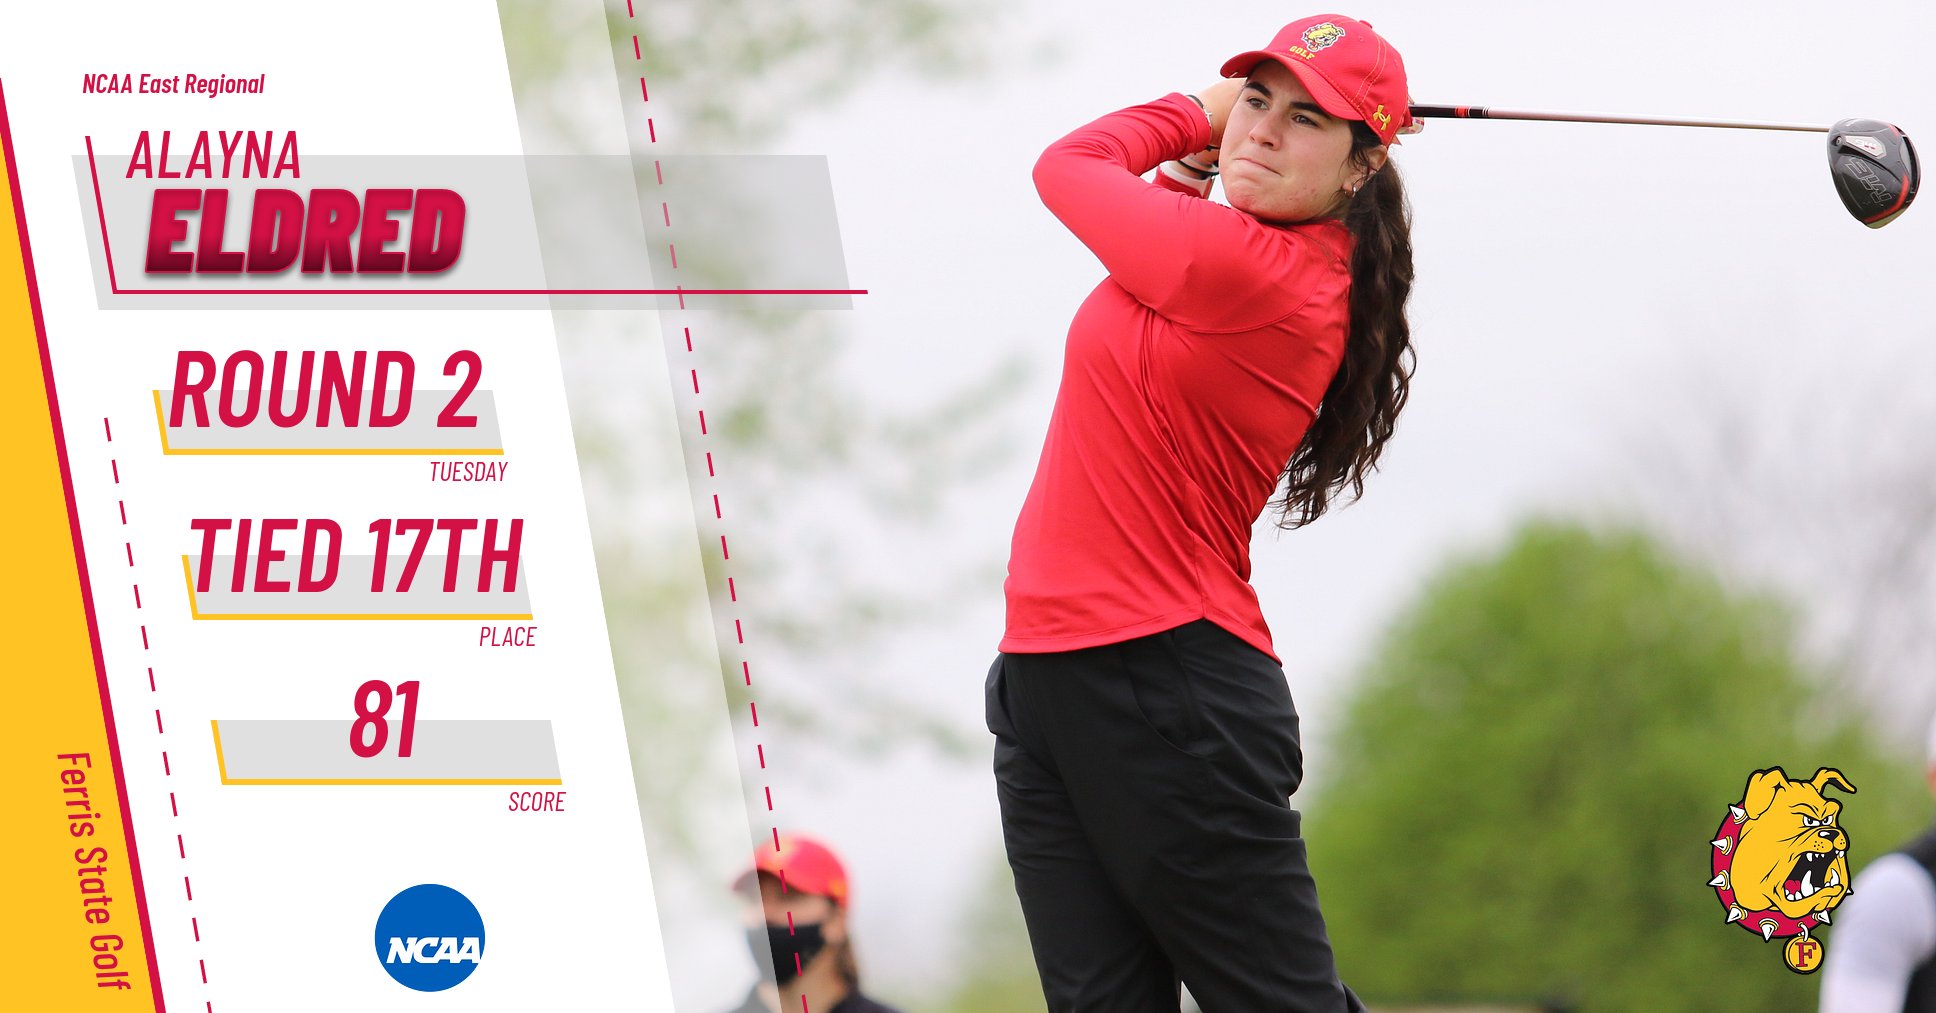 Ferris State's Alayna Eldred Tied For 17th After Two Rounds At NCAA East Regional